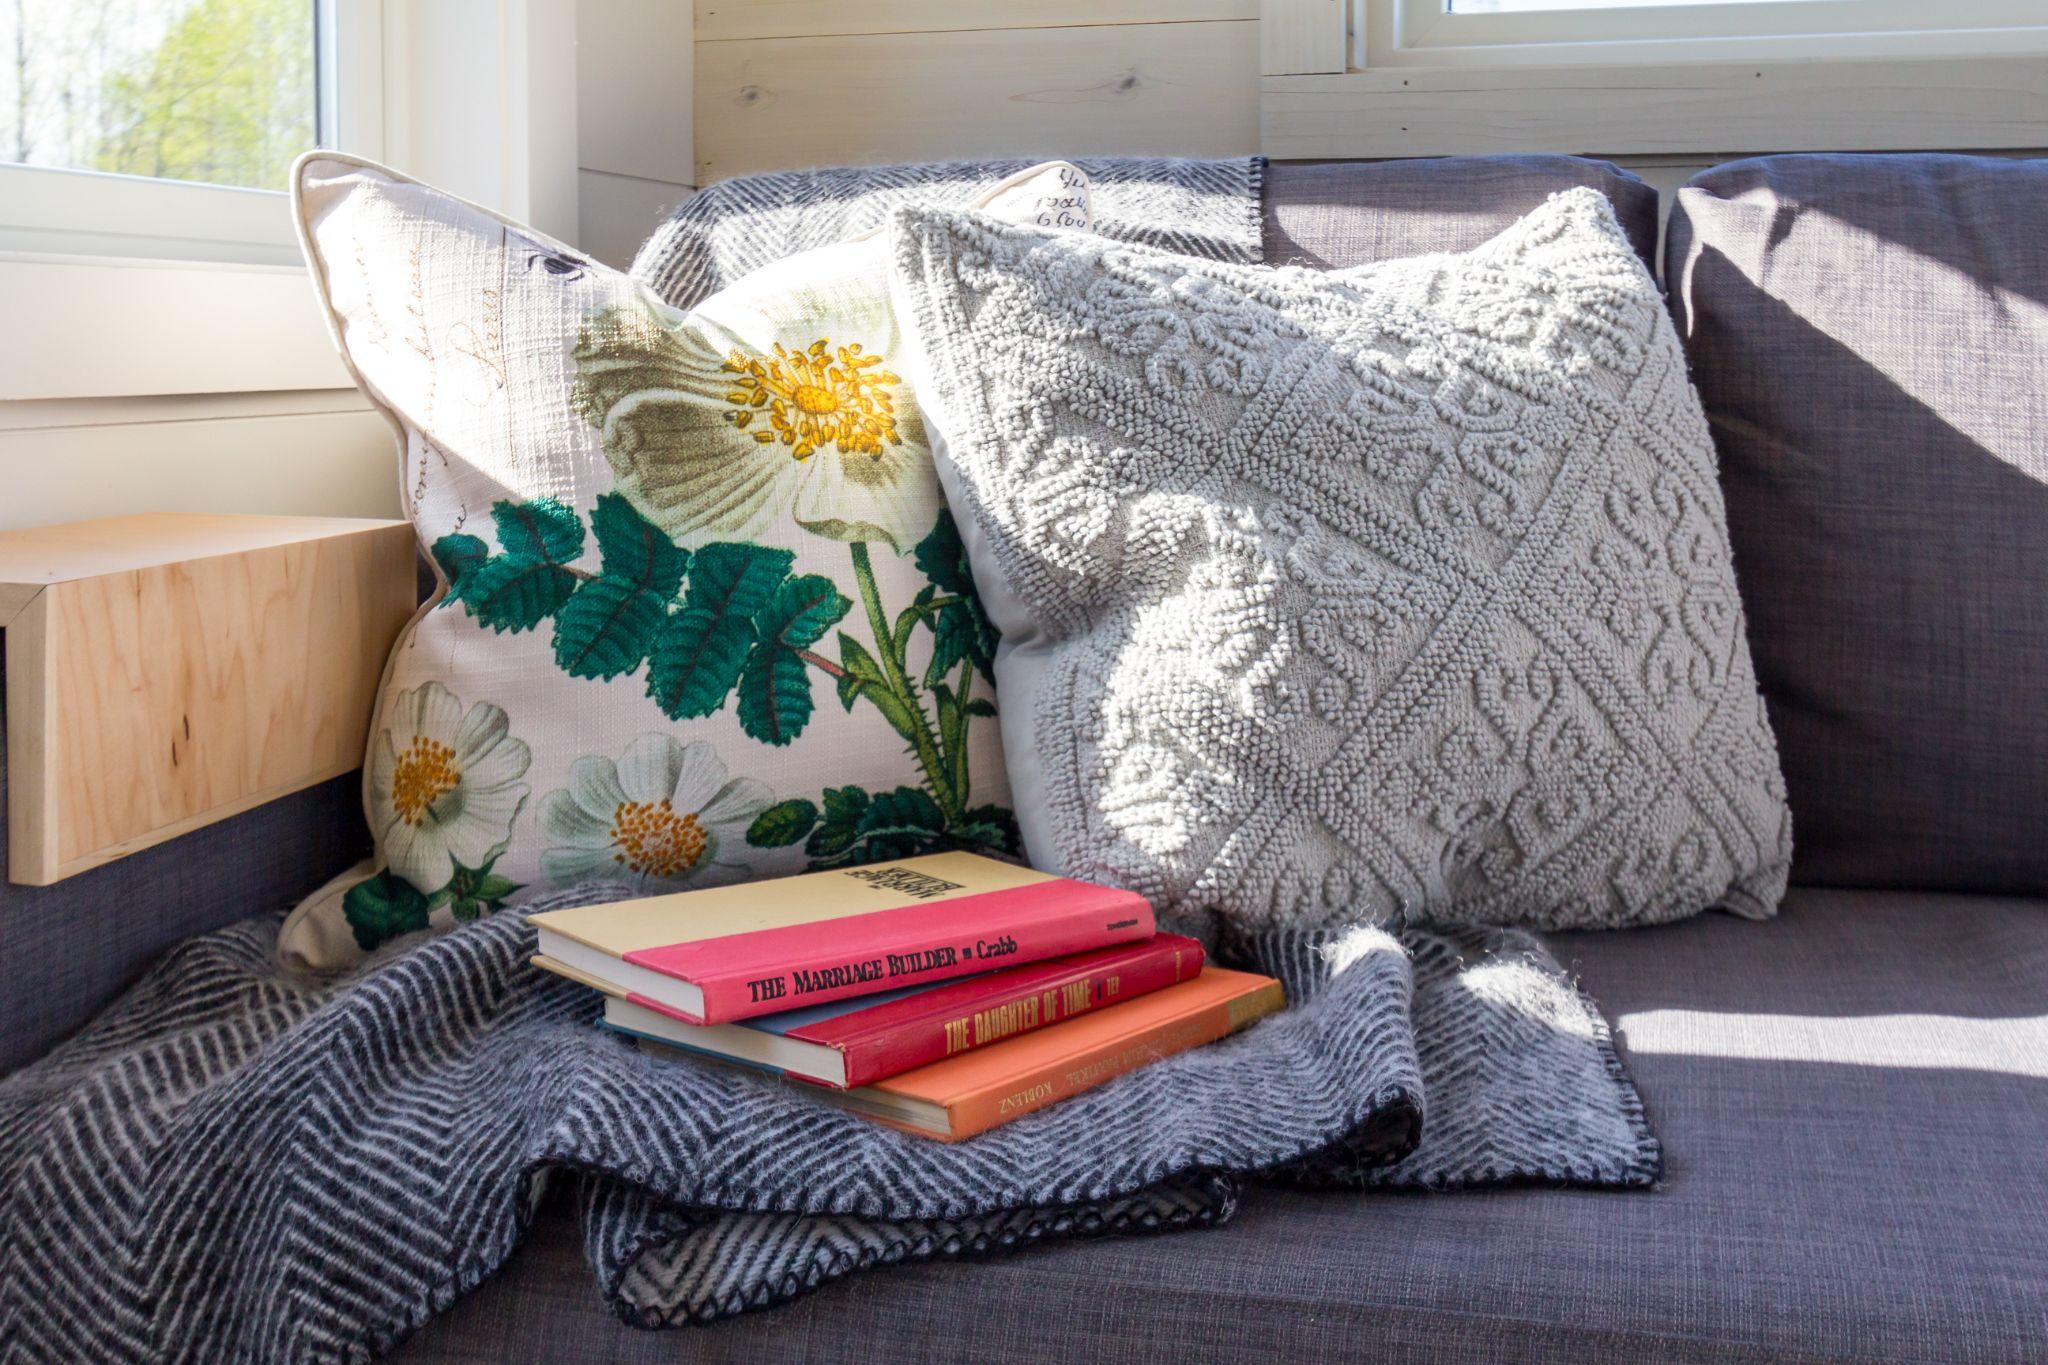 add textured pillow and throw blanket to make sitting area feel cozy